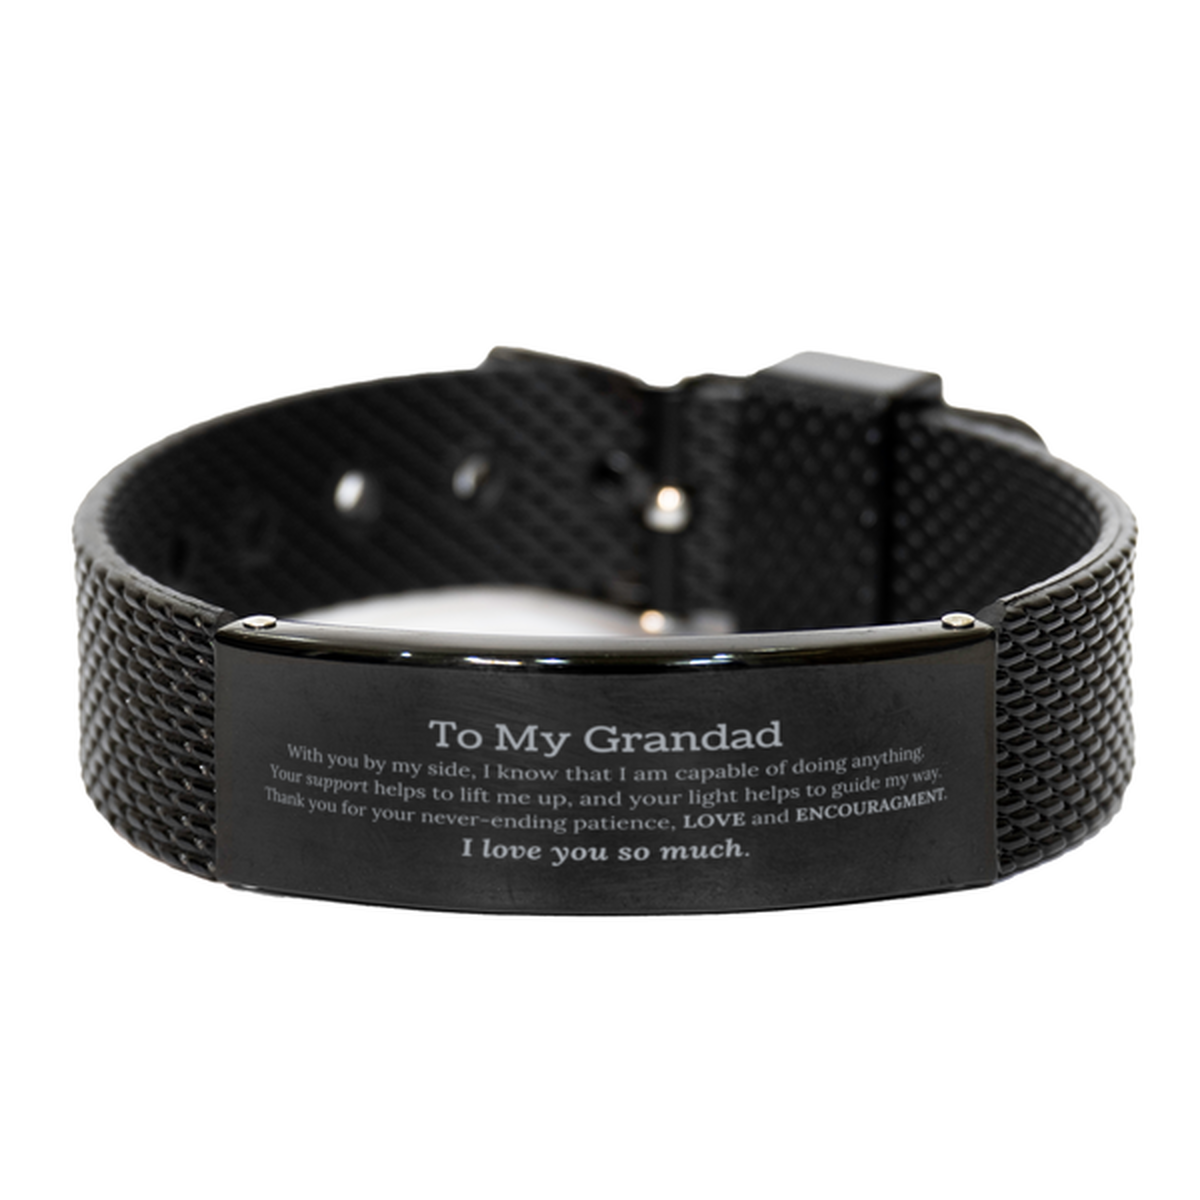 Appreciation Grandad Black Shark Mesh Bracelet Gifts, To My Grandad Birthday Christmas Wedding Keepsake Gifts for Grandad With you by my side, I know that I am capable of doing anything. I love you so much